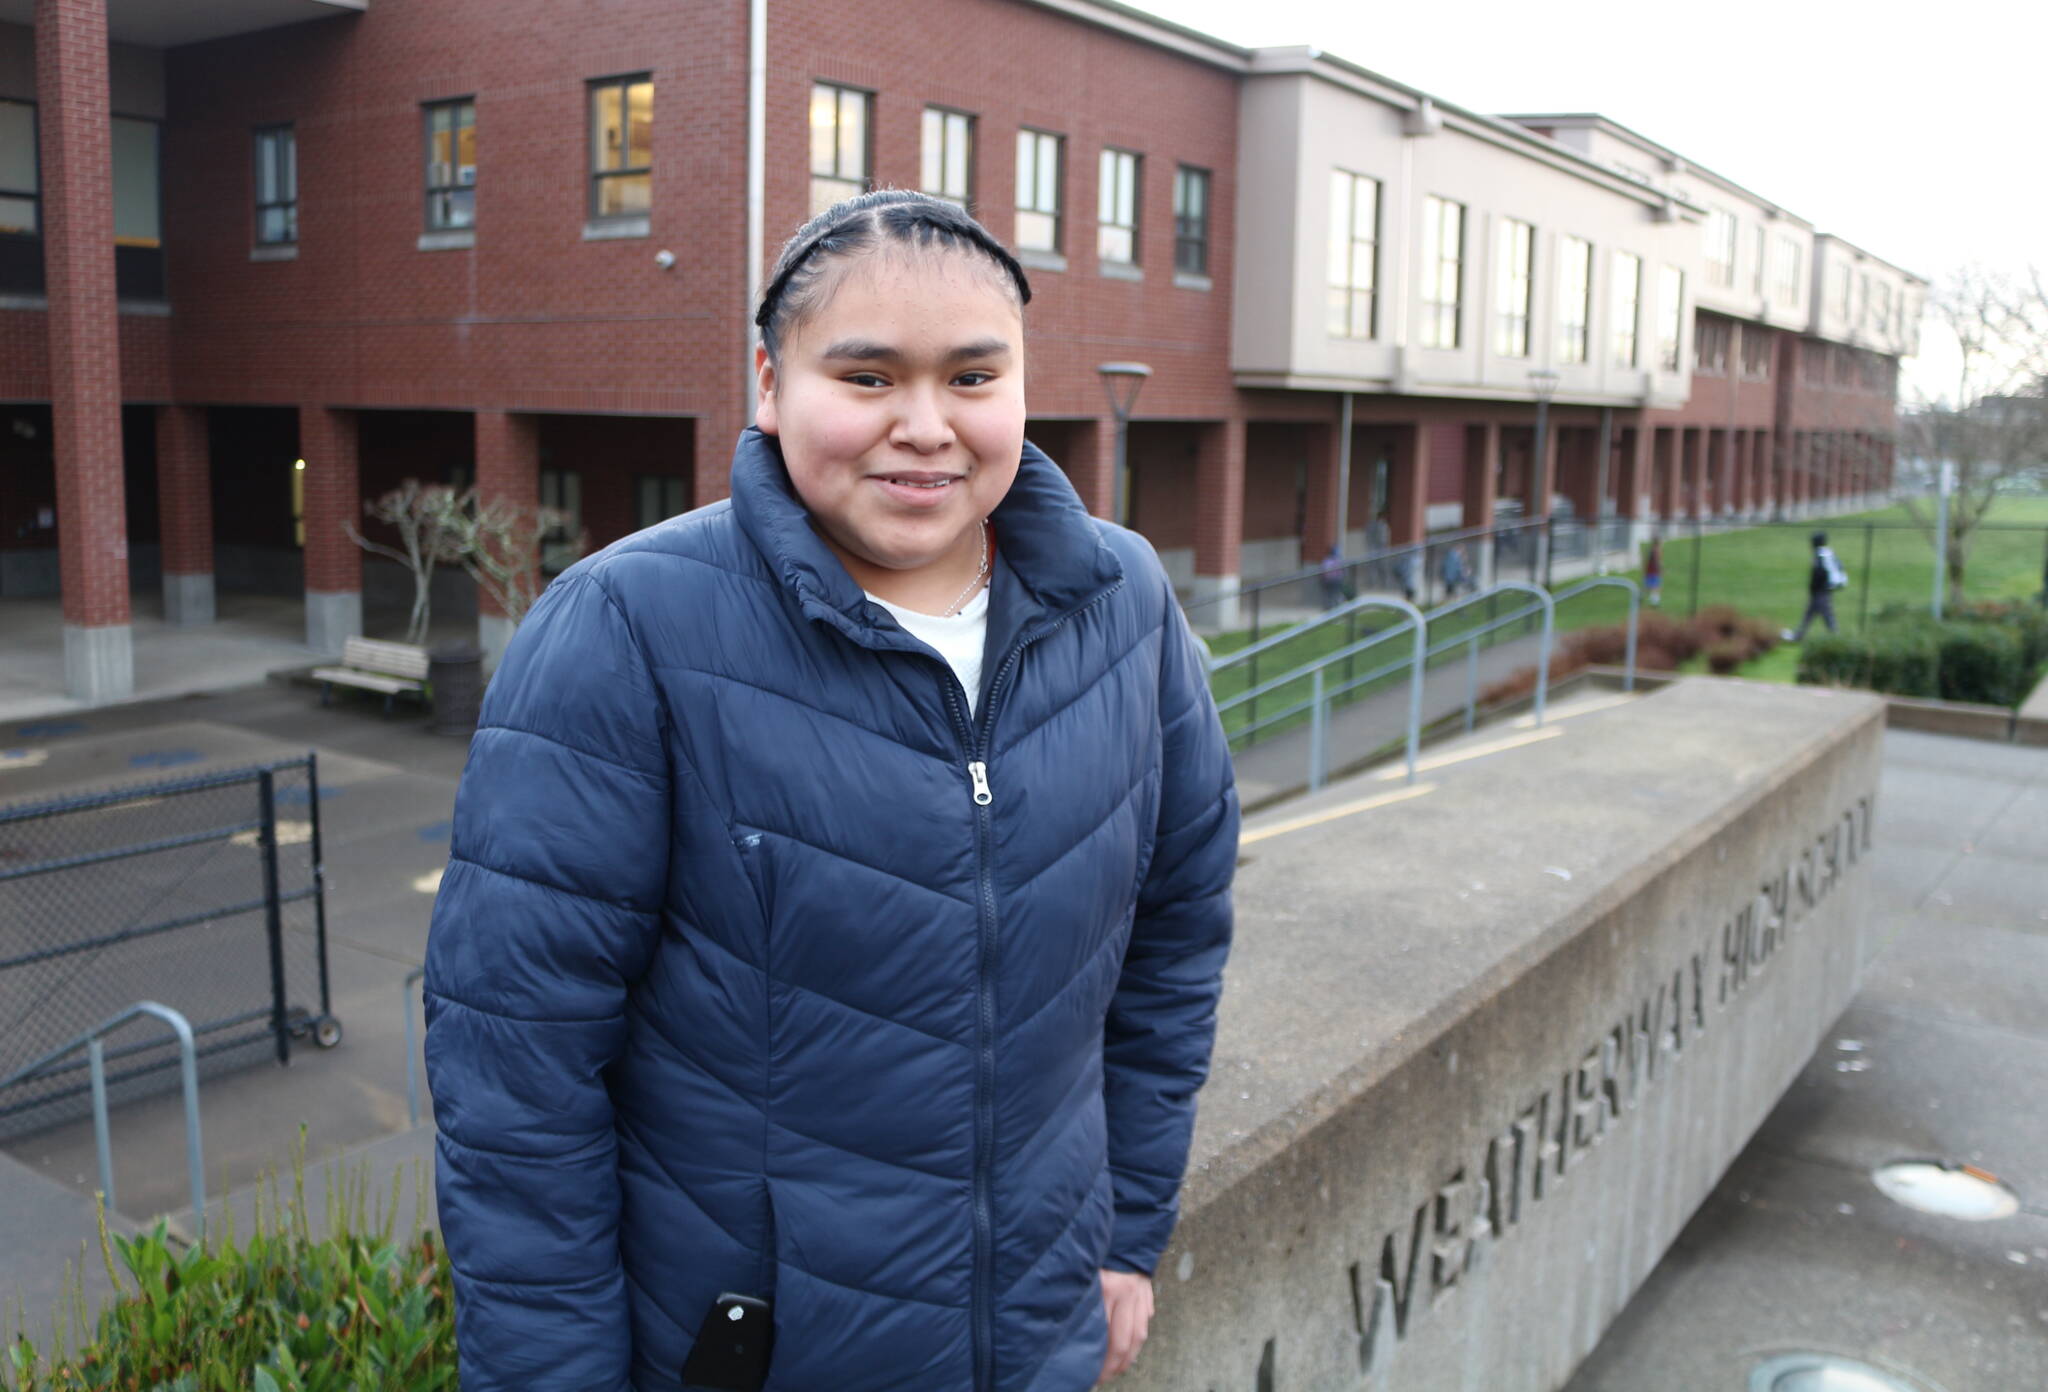 Provided photo
Cristal Ramirez Garcia, a first-generation student originally from Tierra Blanca, Oaxaca, Mexico, has been selected by the city of Aberdeen to represent the city in a statewide scholarship hunt. If Garcia wins the $3,000 scholarship, she’d be one of three in the state.